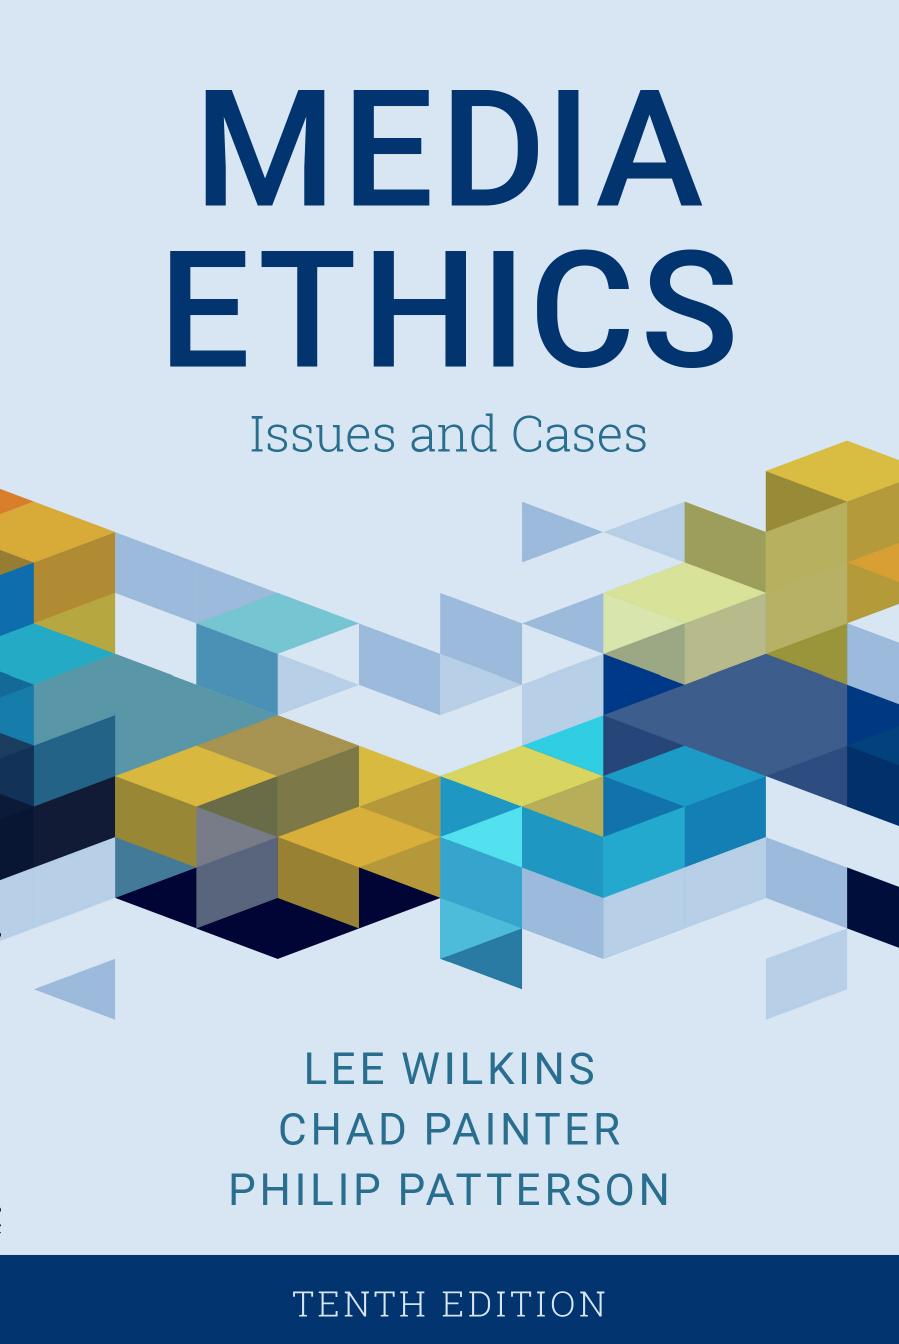 (eBook PDF)Media Ethics: Issues and Cases 10th Edition by Lee Wilkins,Chad Painter,Philip Patterson